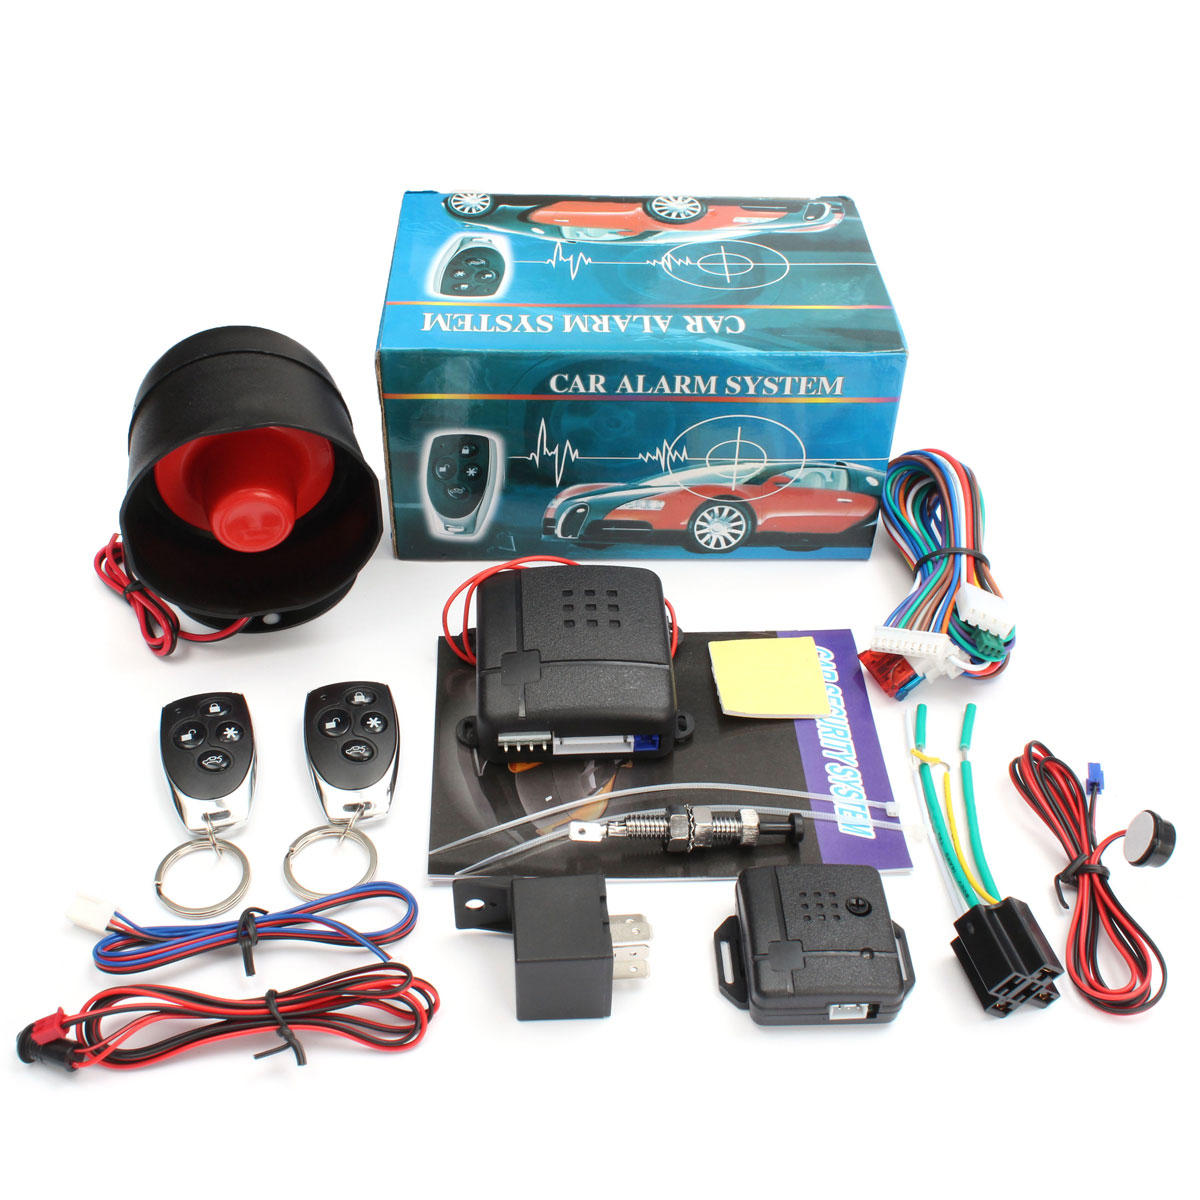 Universal 12V Car Alarm System Auto Burglar Protection Security Keyless with 2 Remote And Alarm Horn